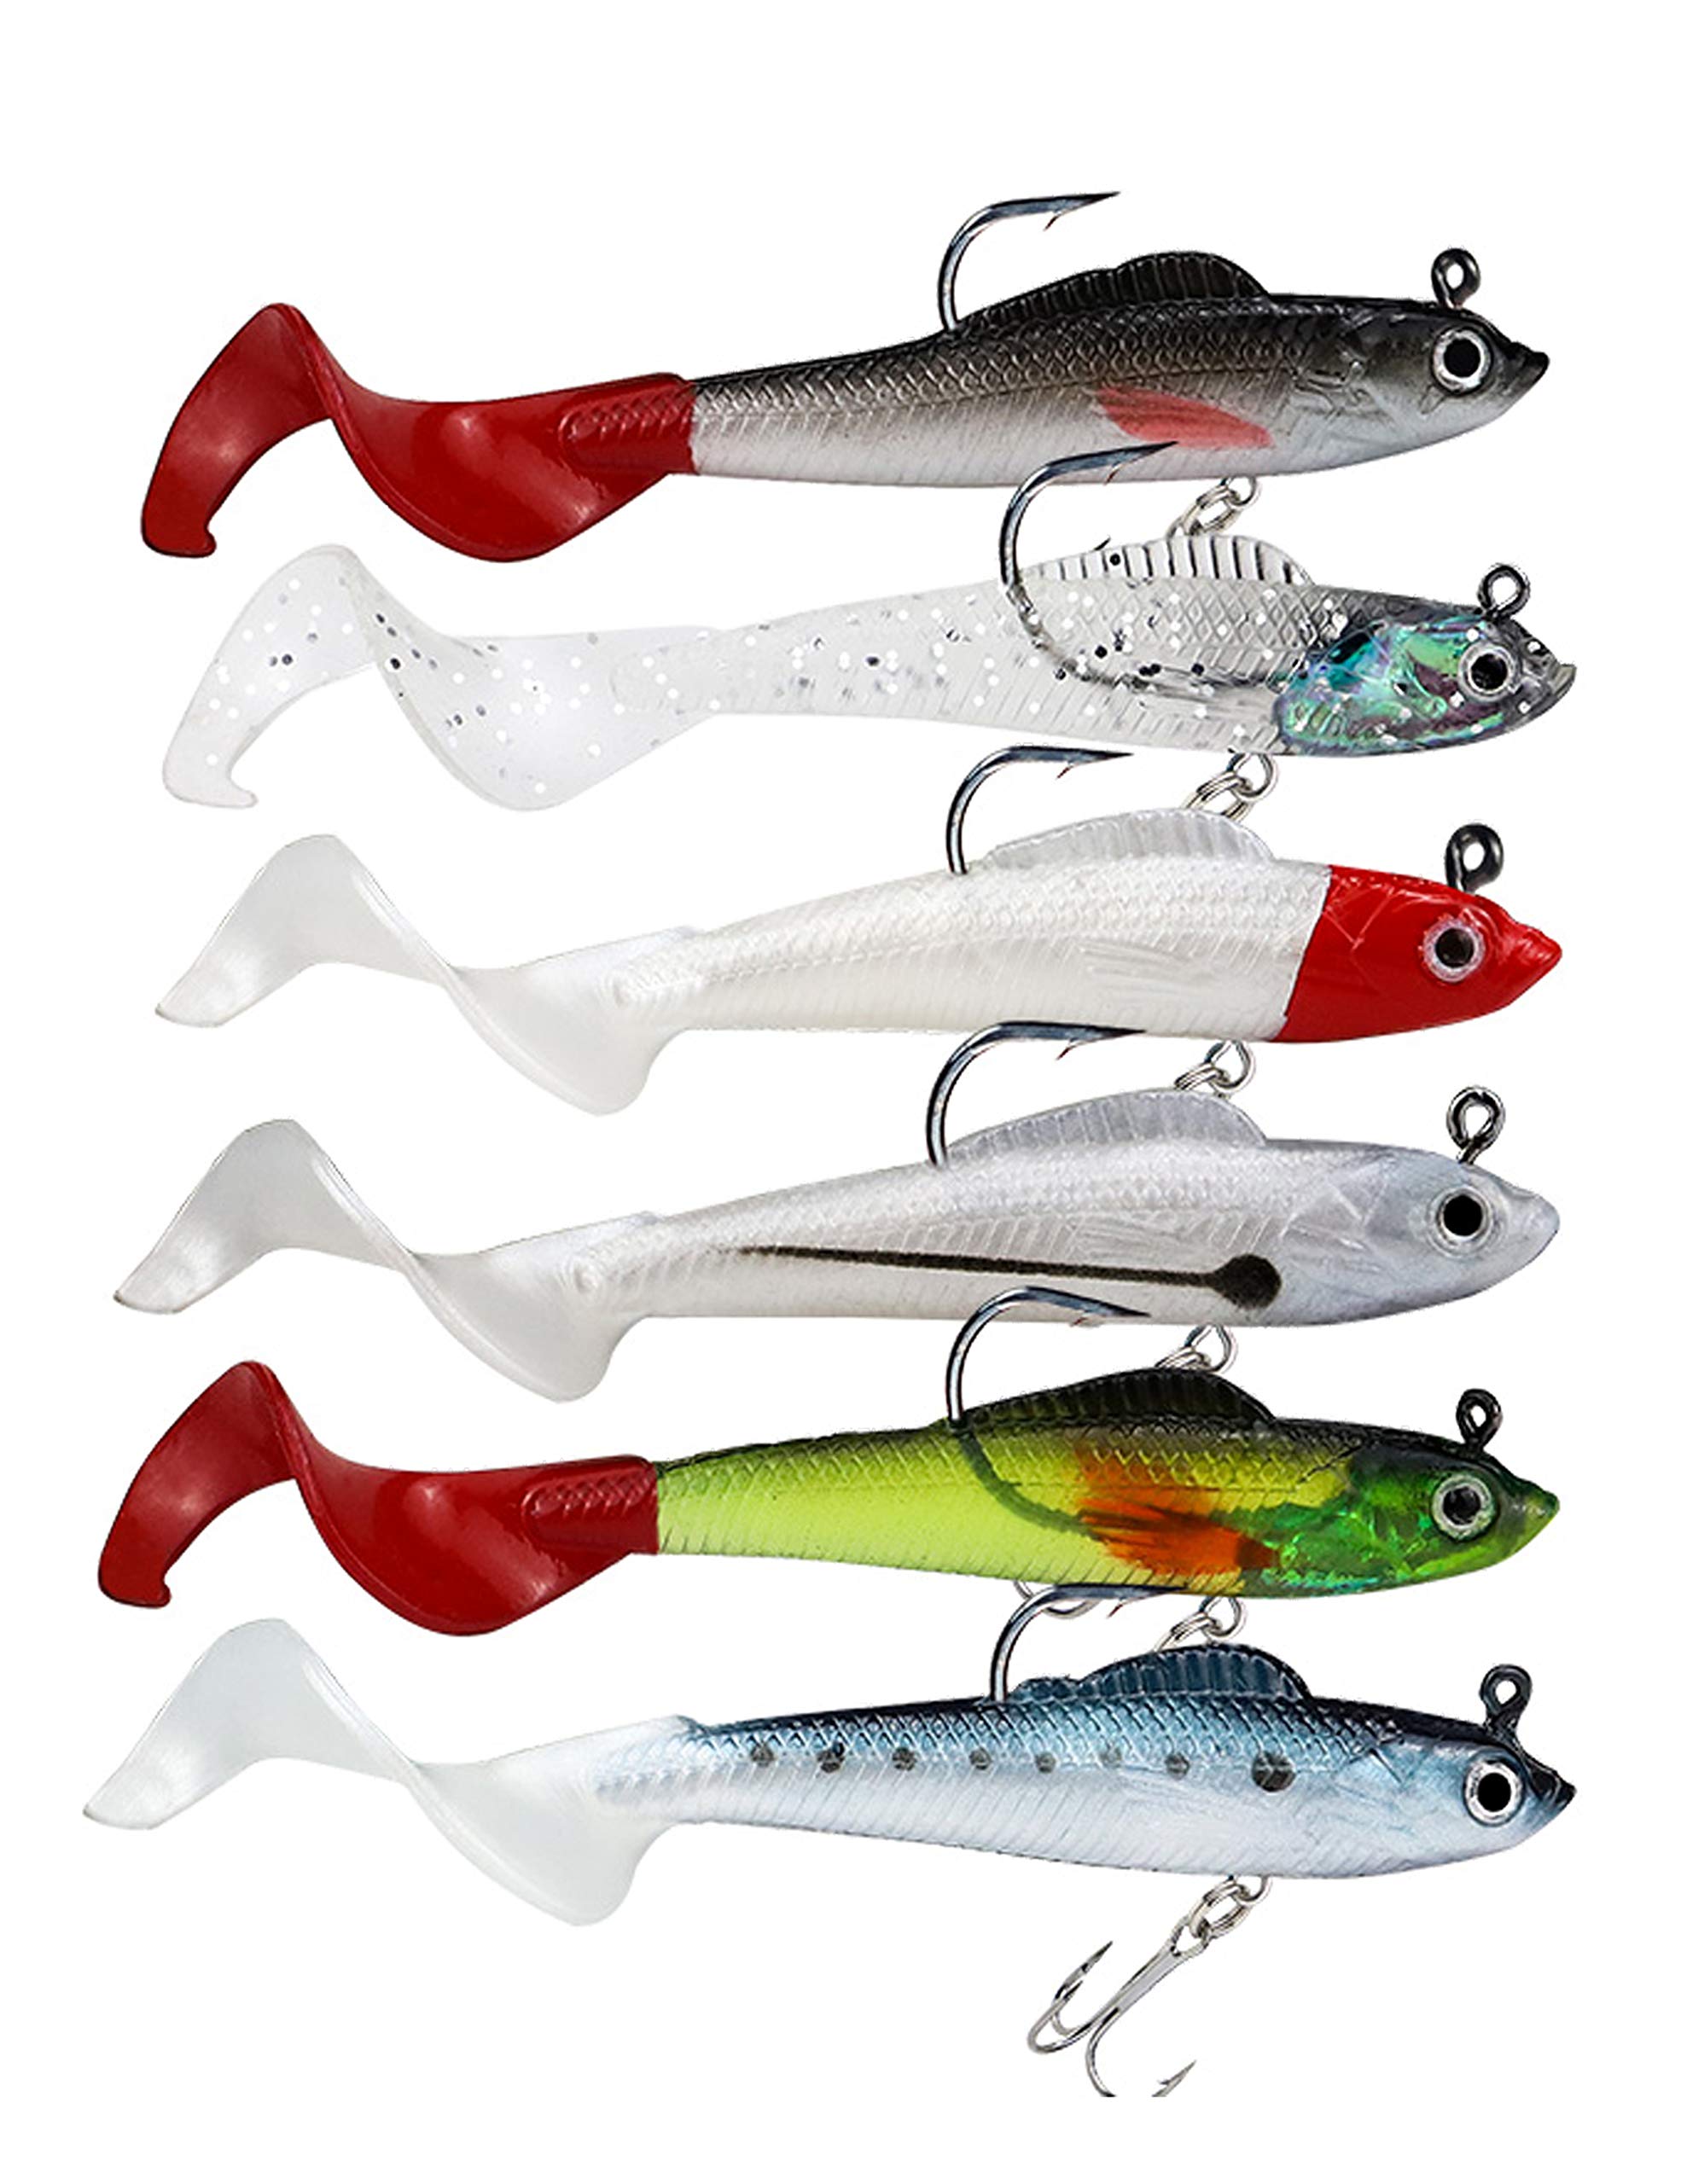 Inzopo Set of 10 Soft Plastic Fishing Lure Swim Bait Artificial Fish Lure  Micro Jig Head Hook Mixed Color